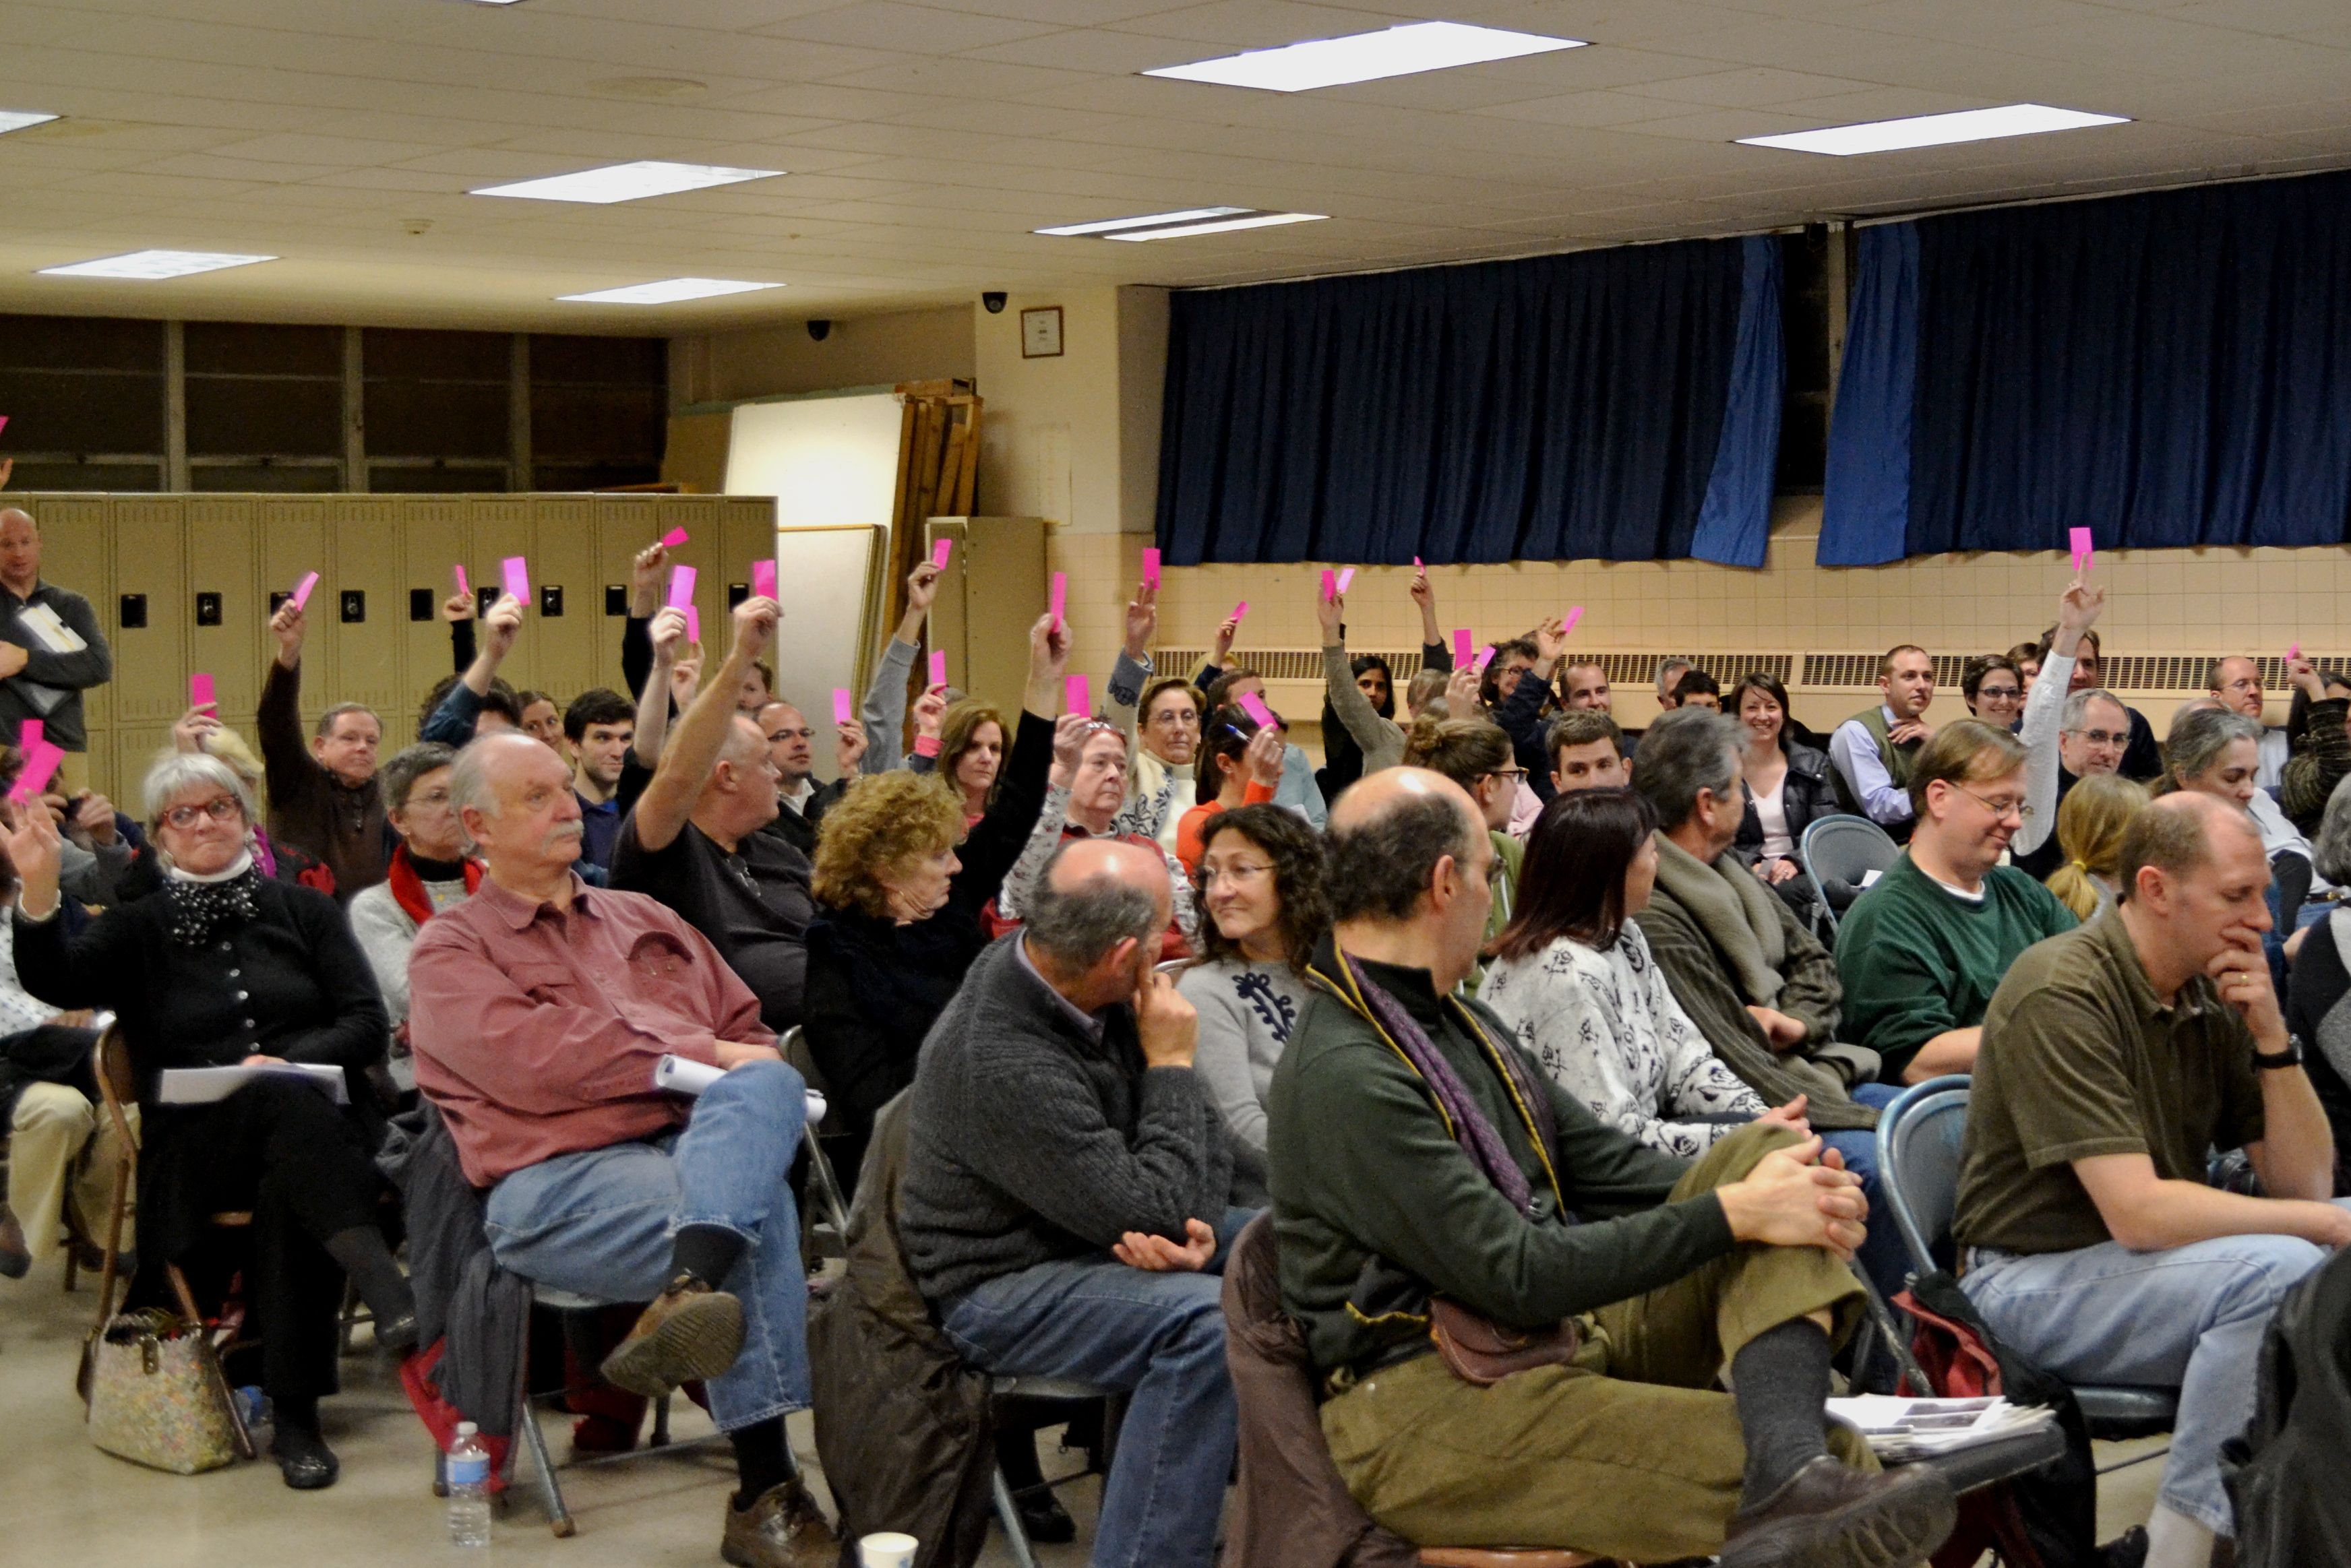 Members showed support for the proposed Fairmount Bike Lanes by raising their pink voting cards